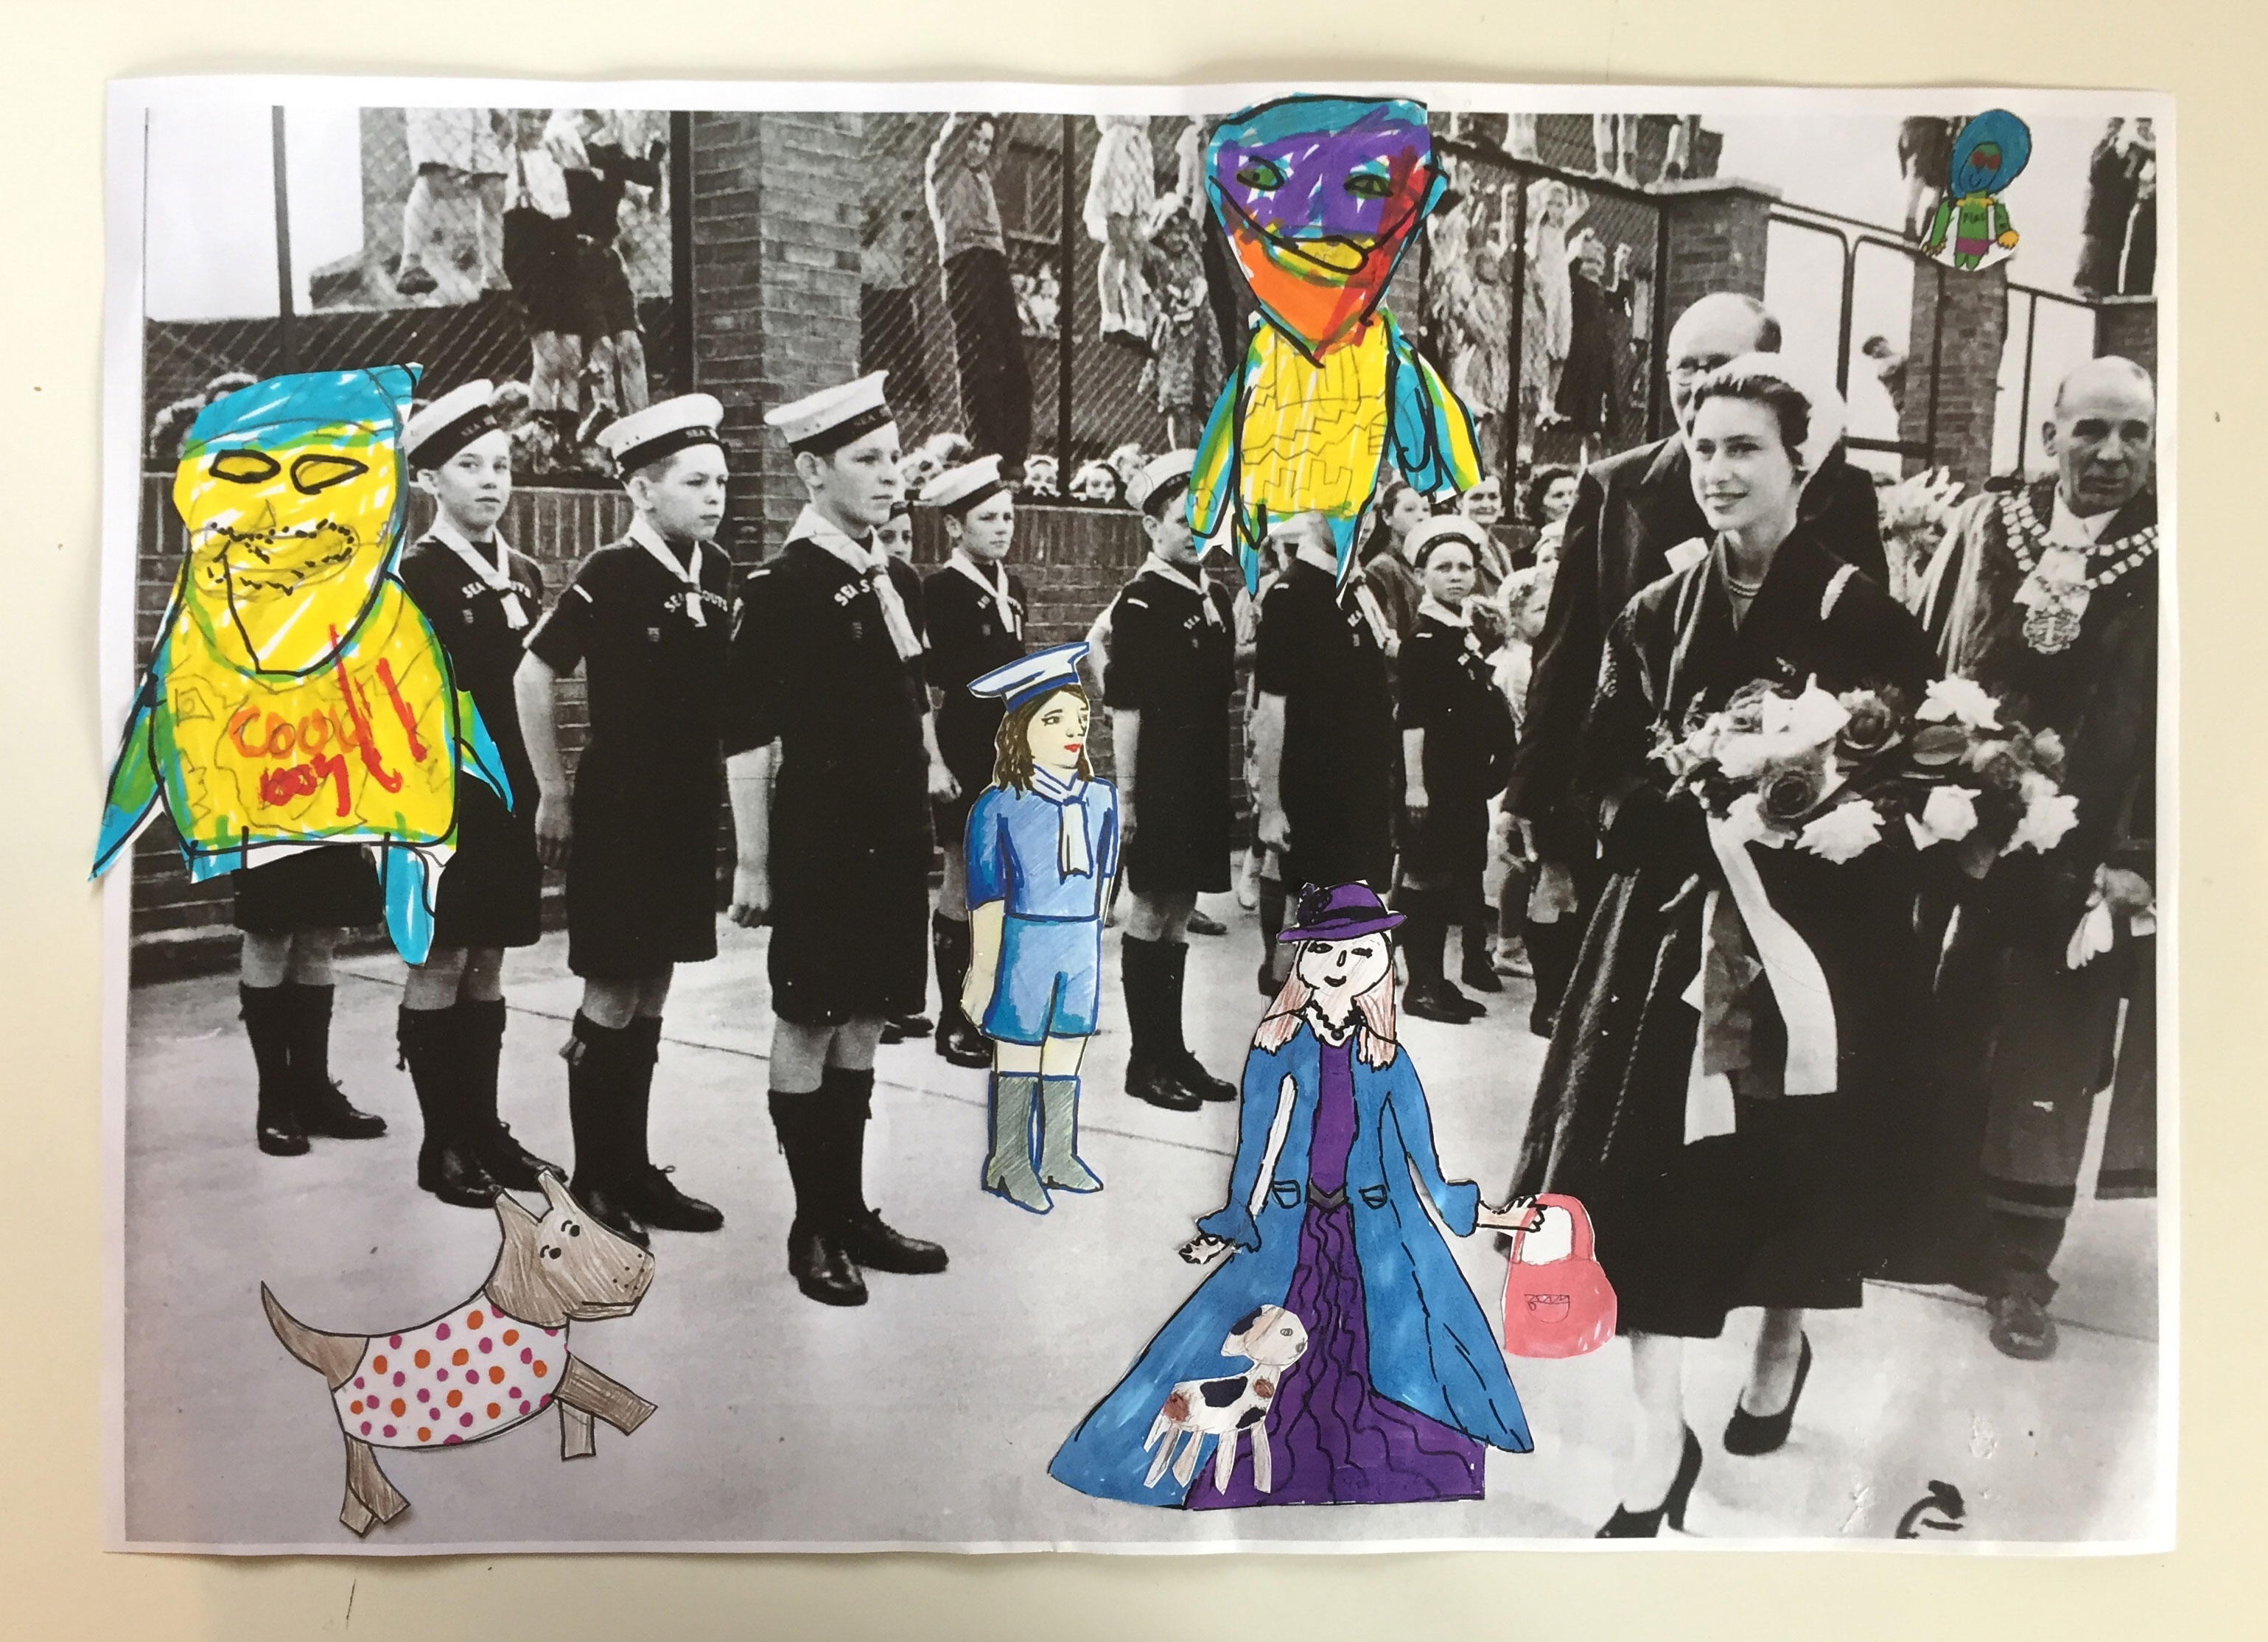 A collage of people and shapes drawn and placed on top of an old black and white photograph of the Queen visiting Barking and Dagenham